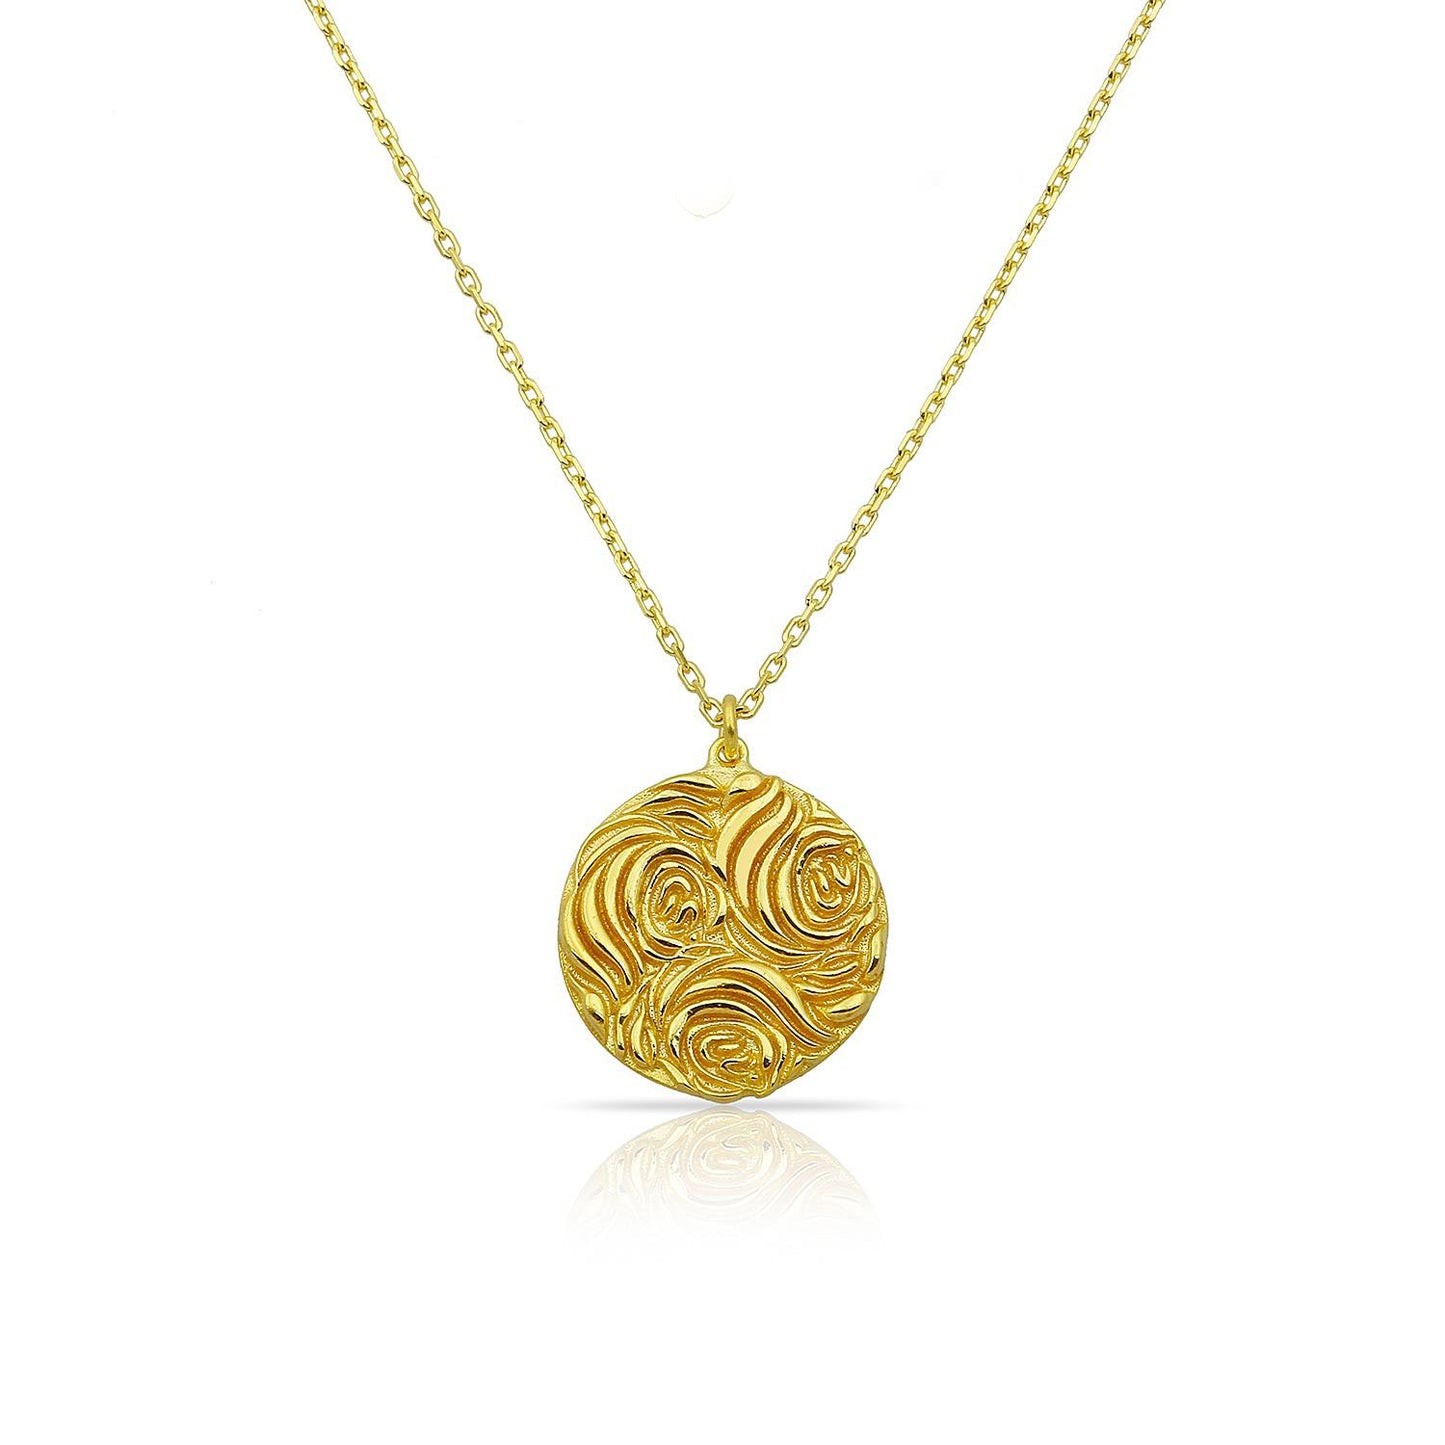 Loverly Flower Coin Pendant PREORDER JEWELRY The Sis Kiss